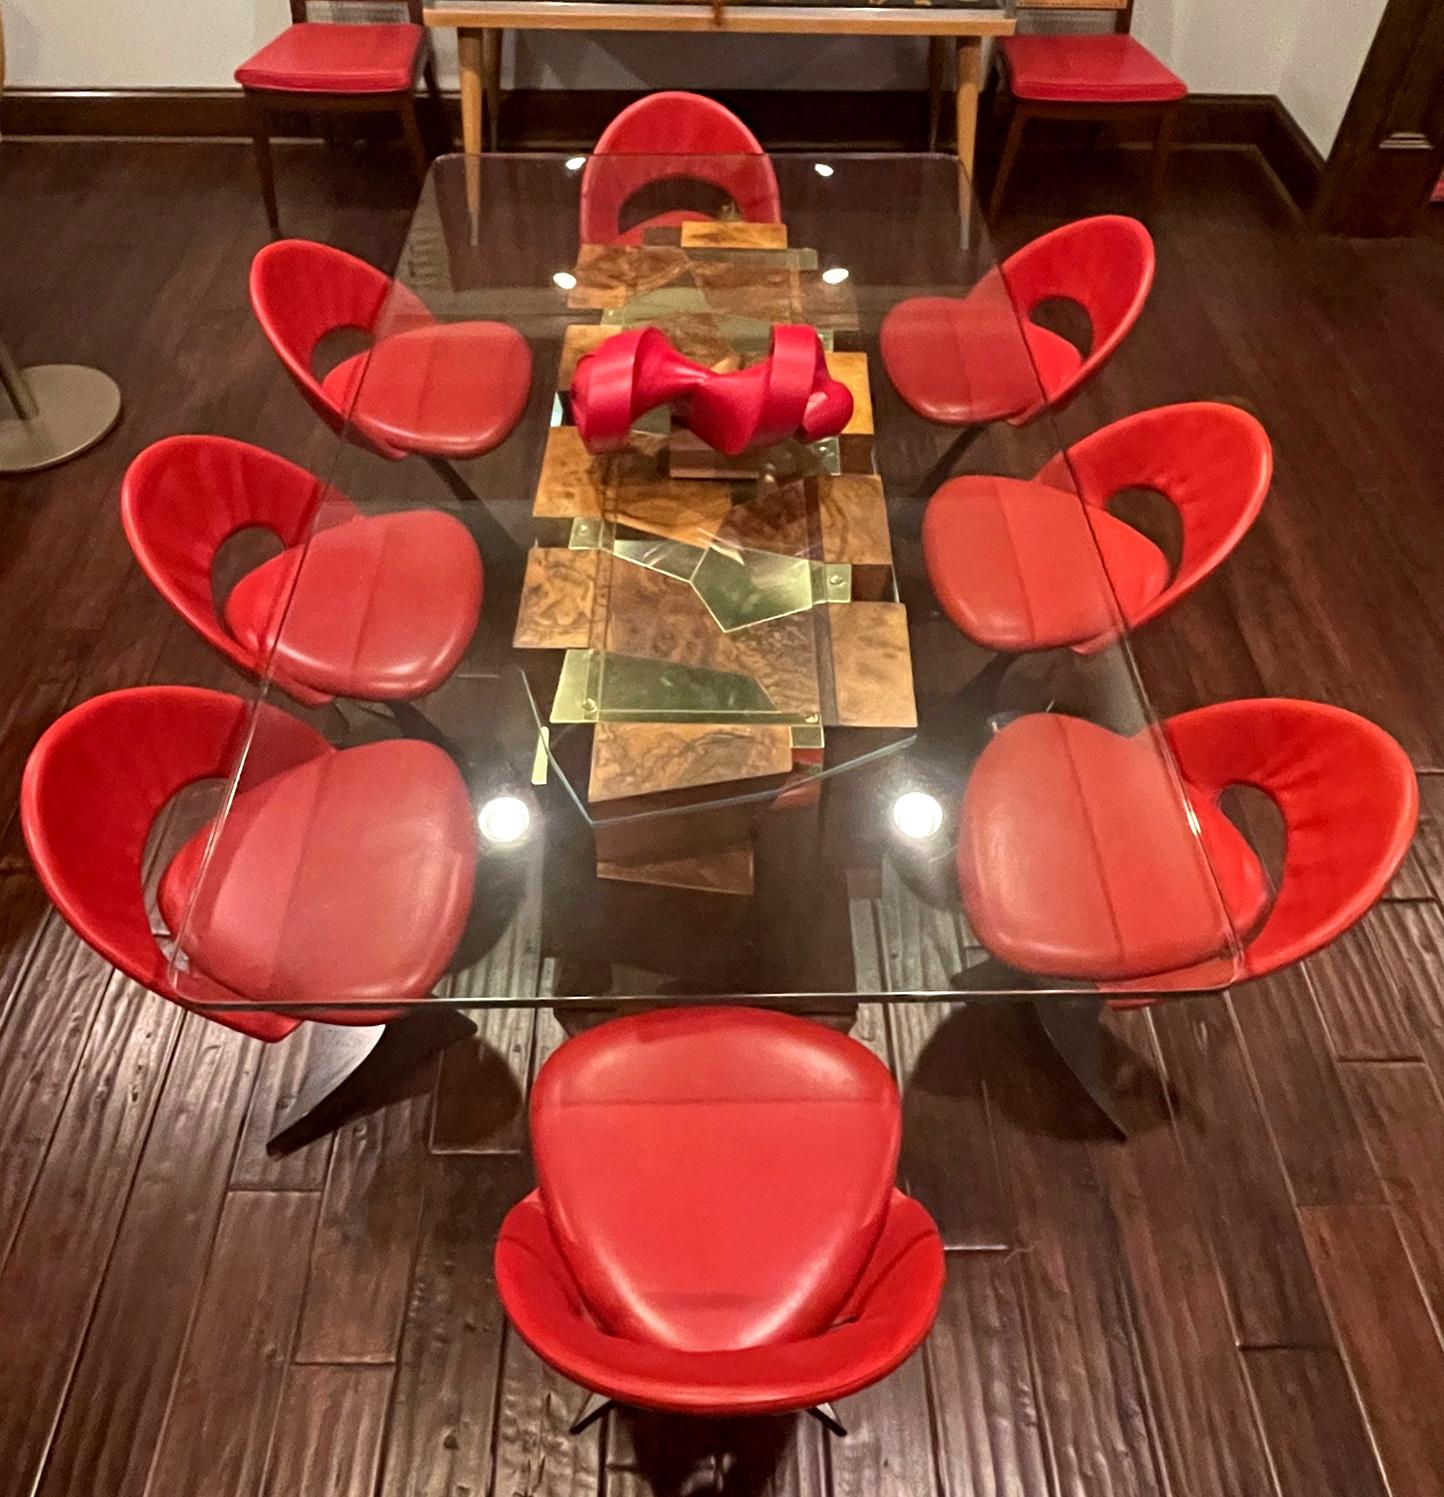 A set of sculptural pedestal chairs in black enamel steel frame and red leather upholstery designed by Spanish architect Santiago Calatrava (1951-). These limited production chairs were manufactured by De Sede for the famed Tabourettli Theatre in